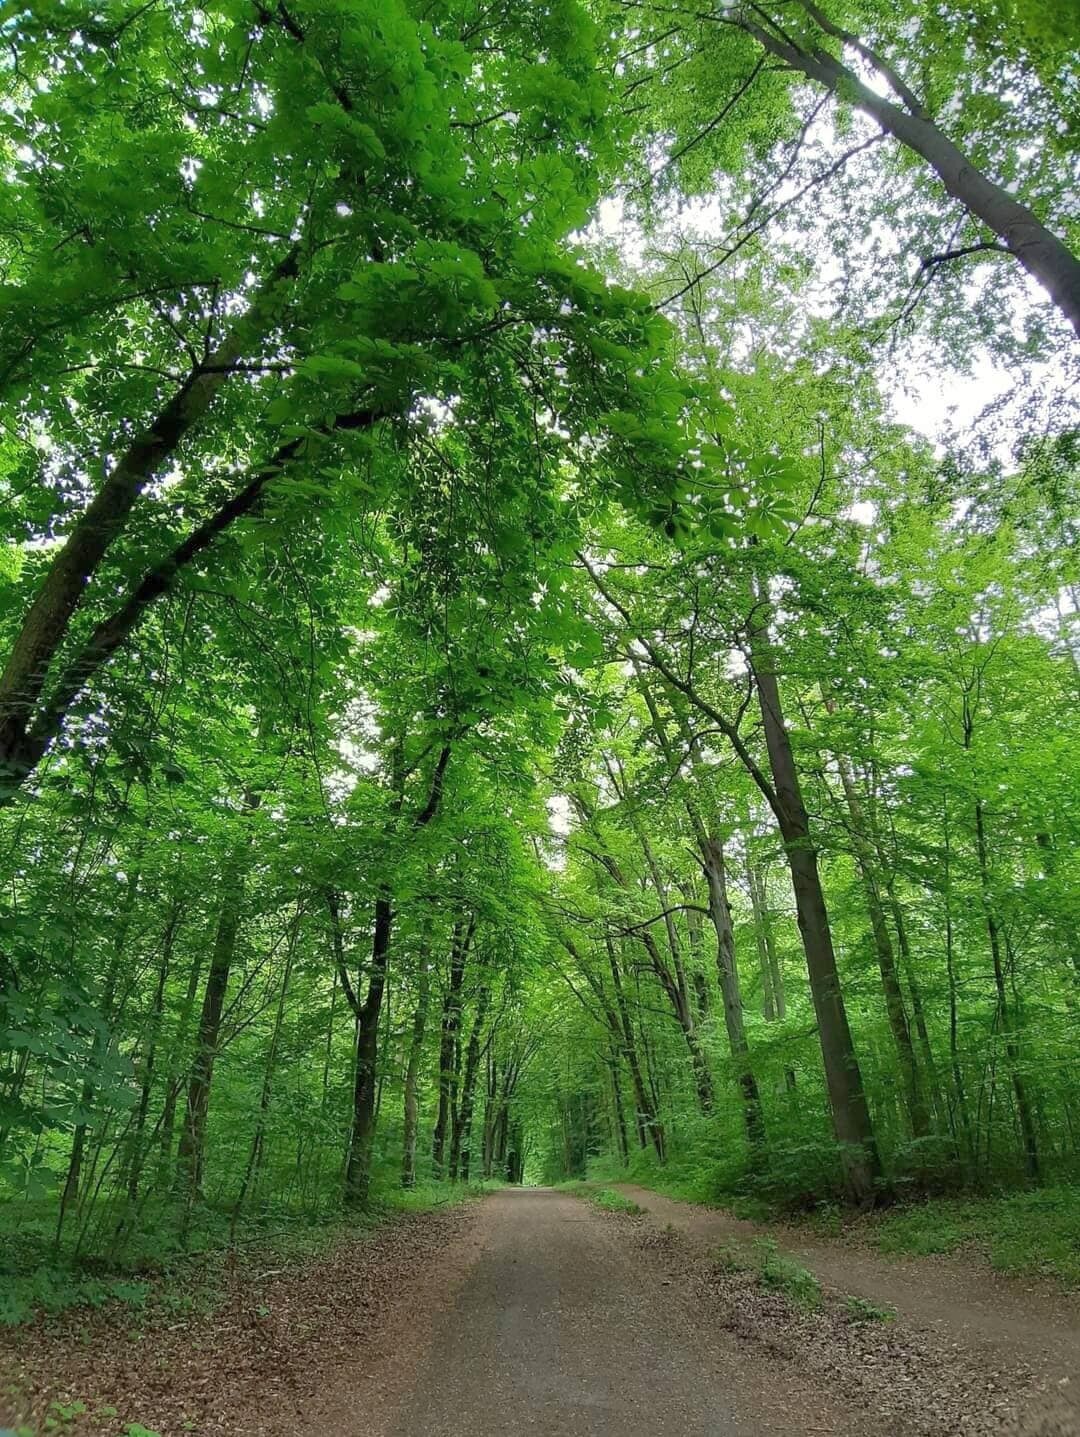 Climate change in the forests of northern Germany: Team finds widespread drought stress in European beech